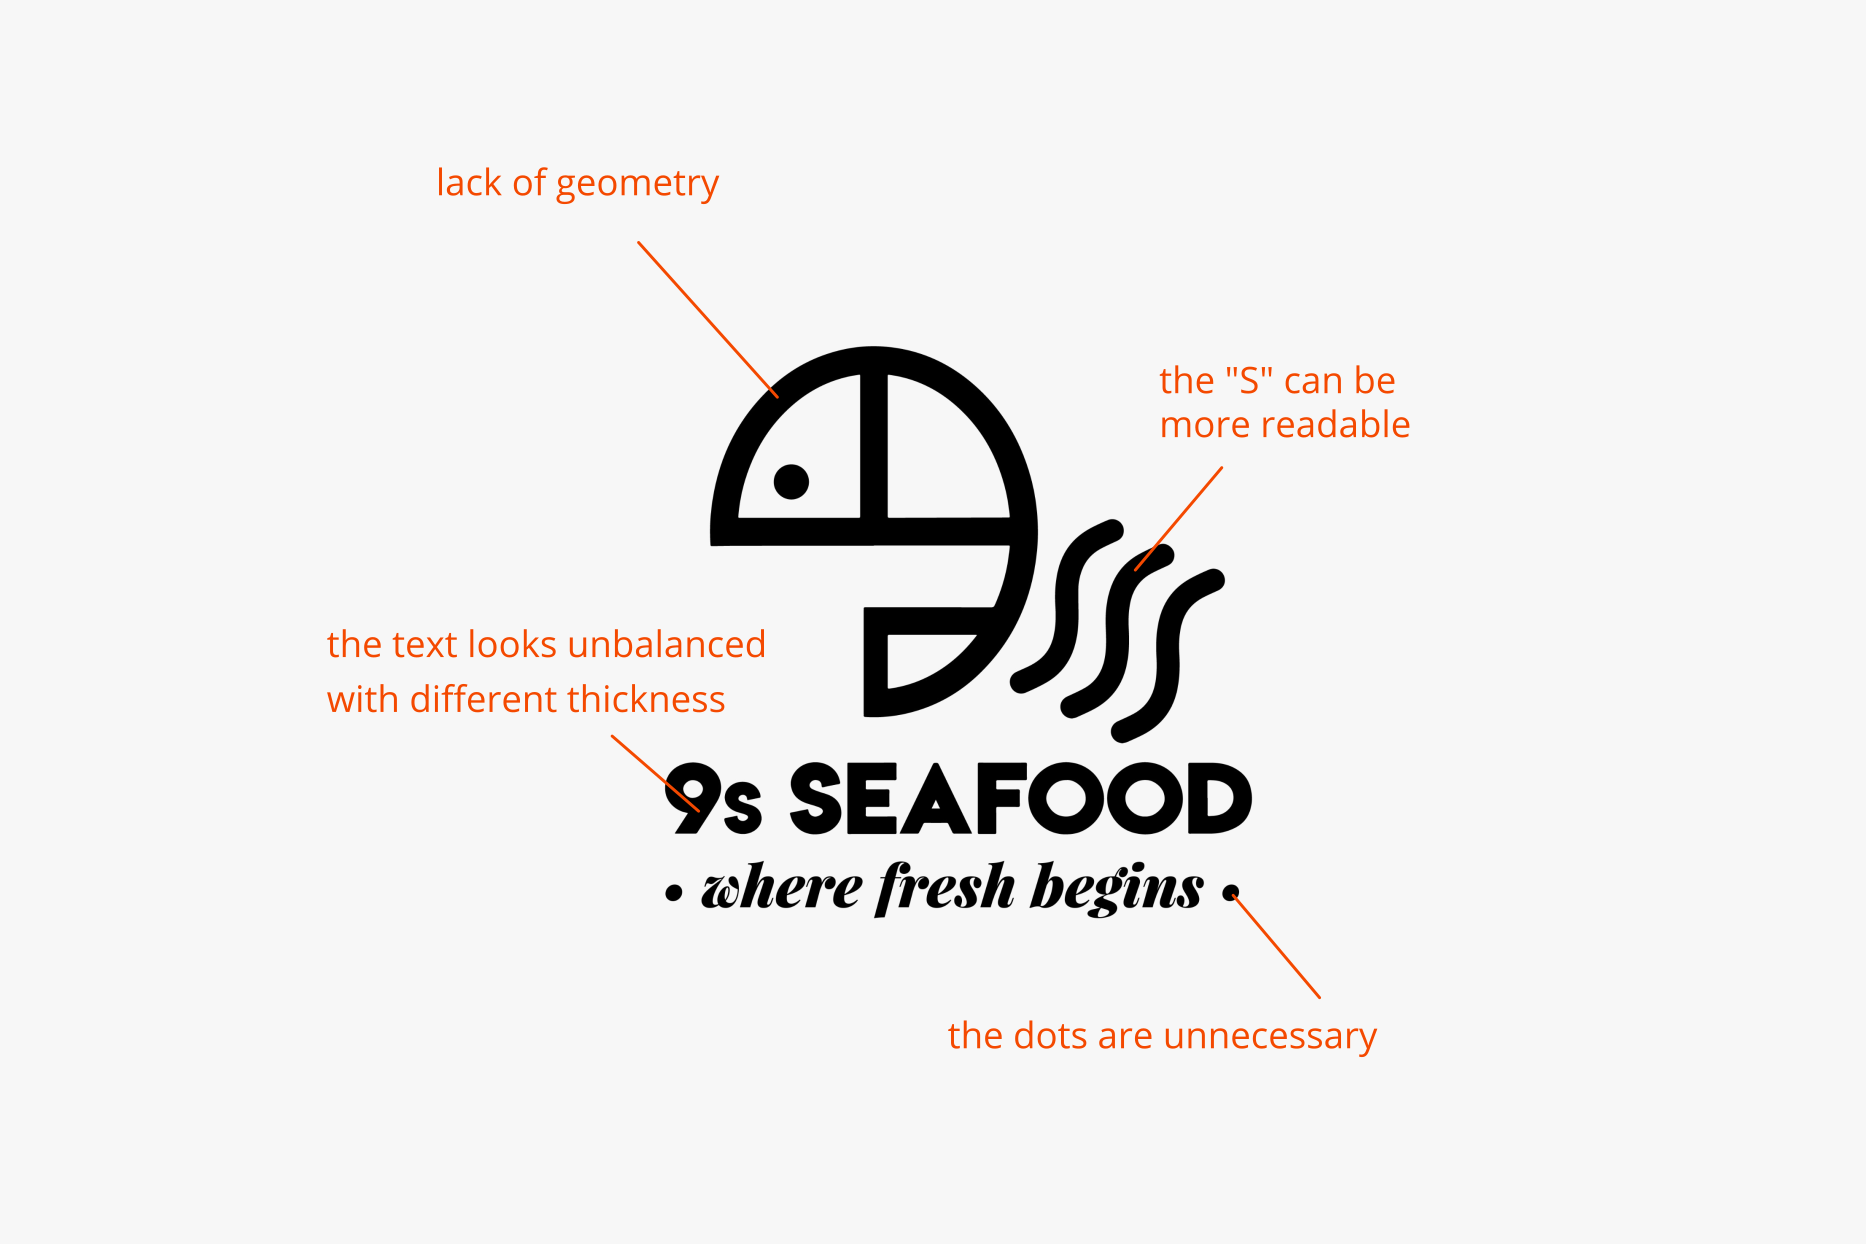 The logo they had for 9s Seafood